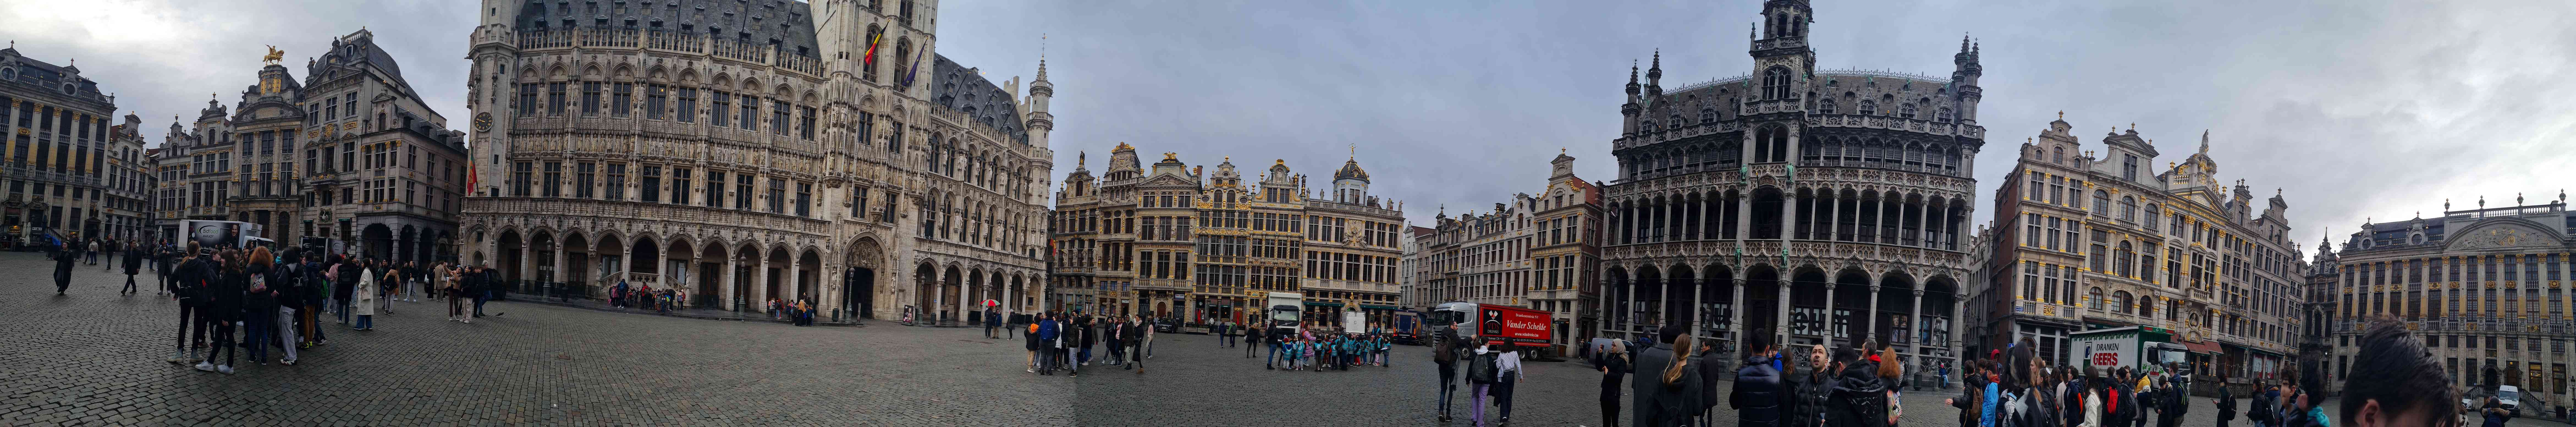 brussels-main-square-panorama